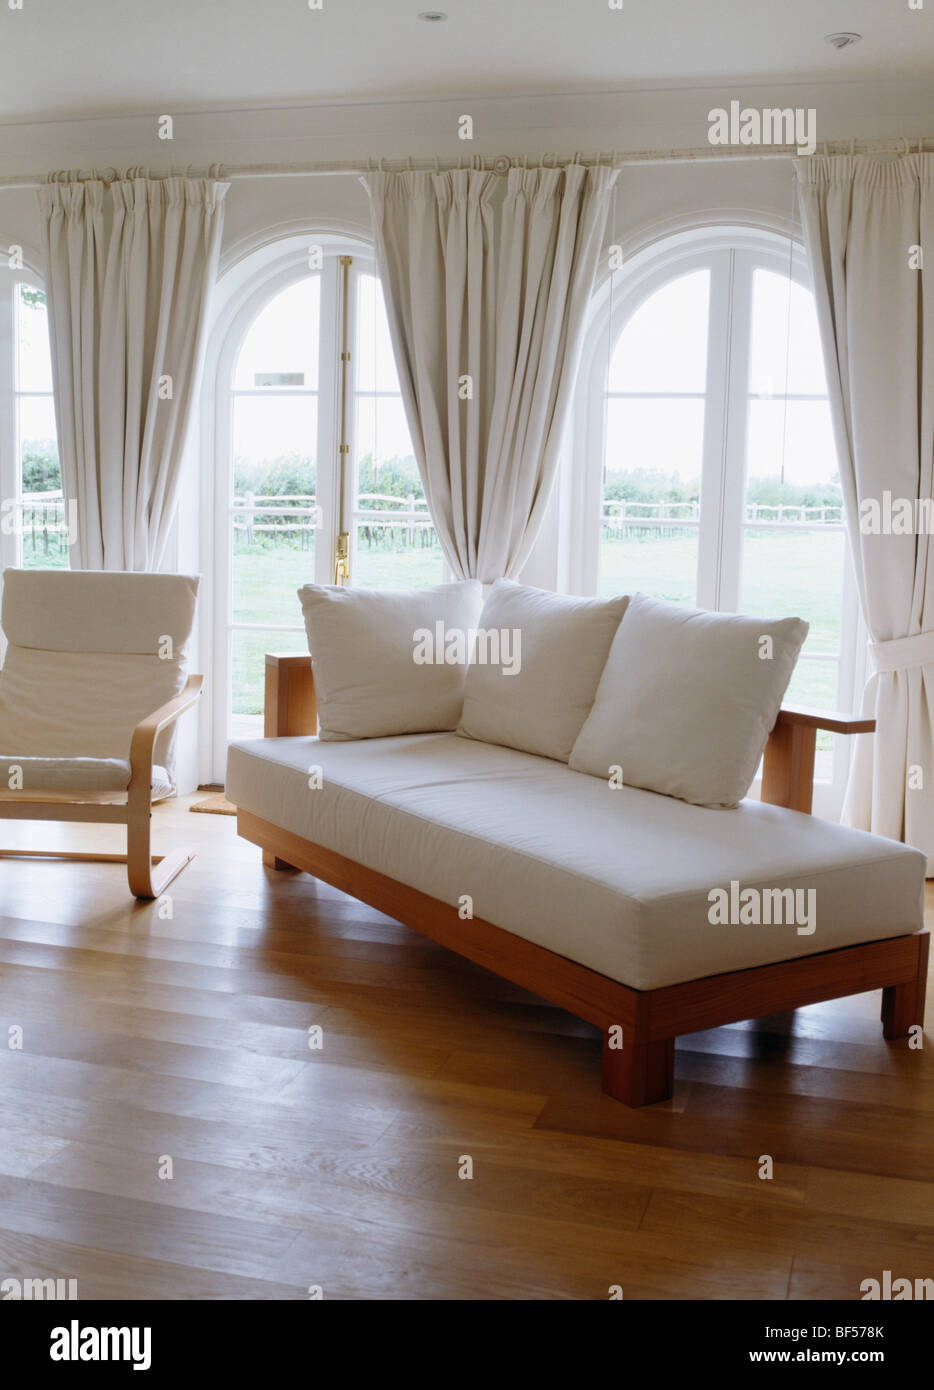 Day Bed With White Cushions In Living Room With Wooden Floor And Stock Photo Alamy